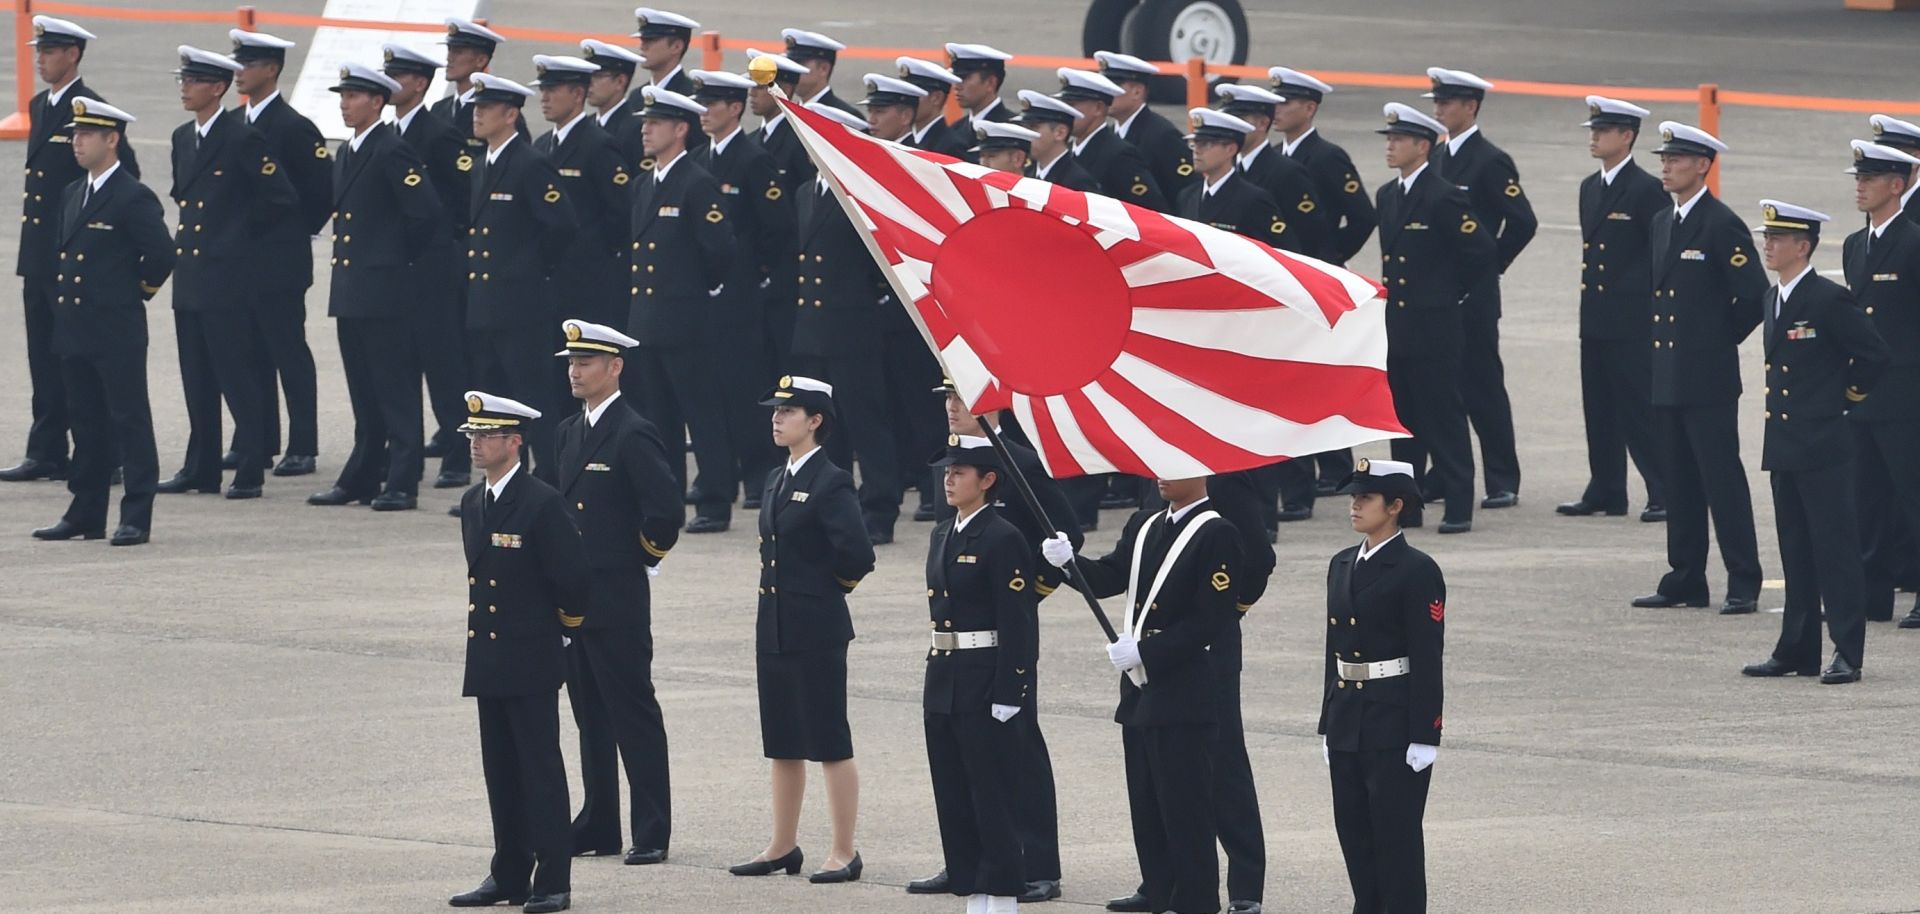 Japanese navy servicemen in Omitama stand with their flag on a runway in anticipation of an upcoming ceremony. 